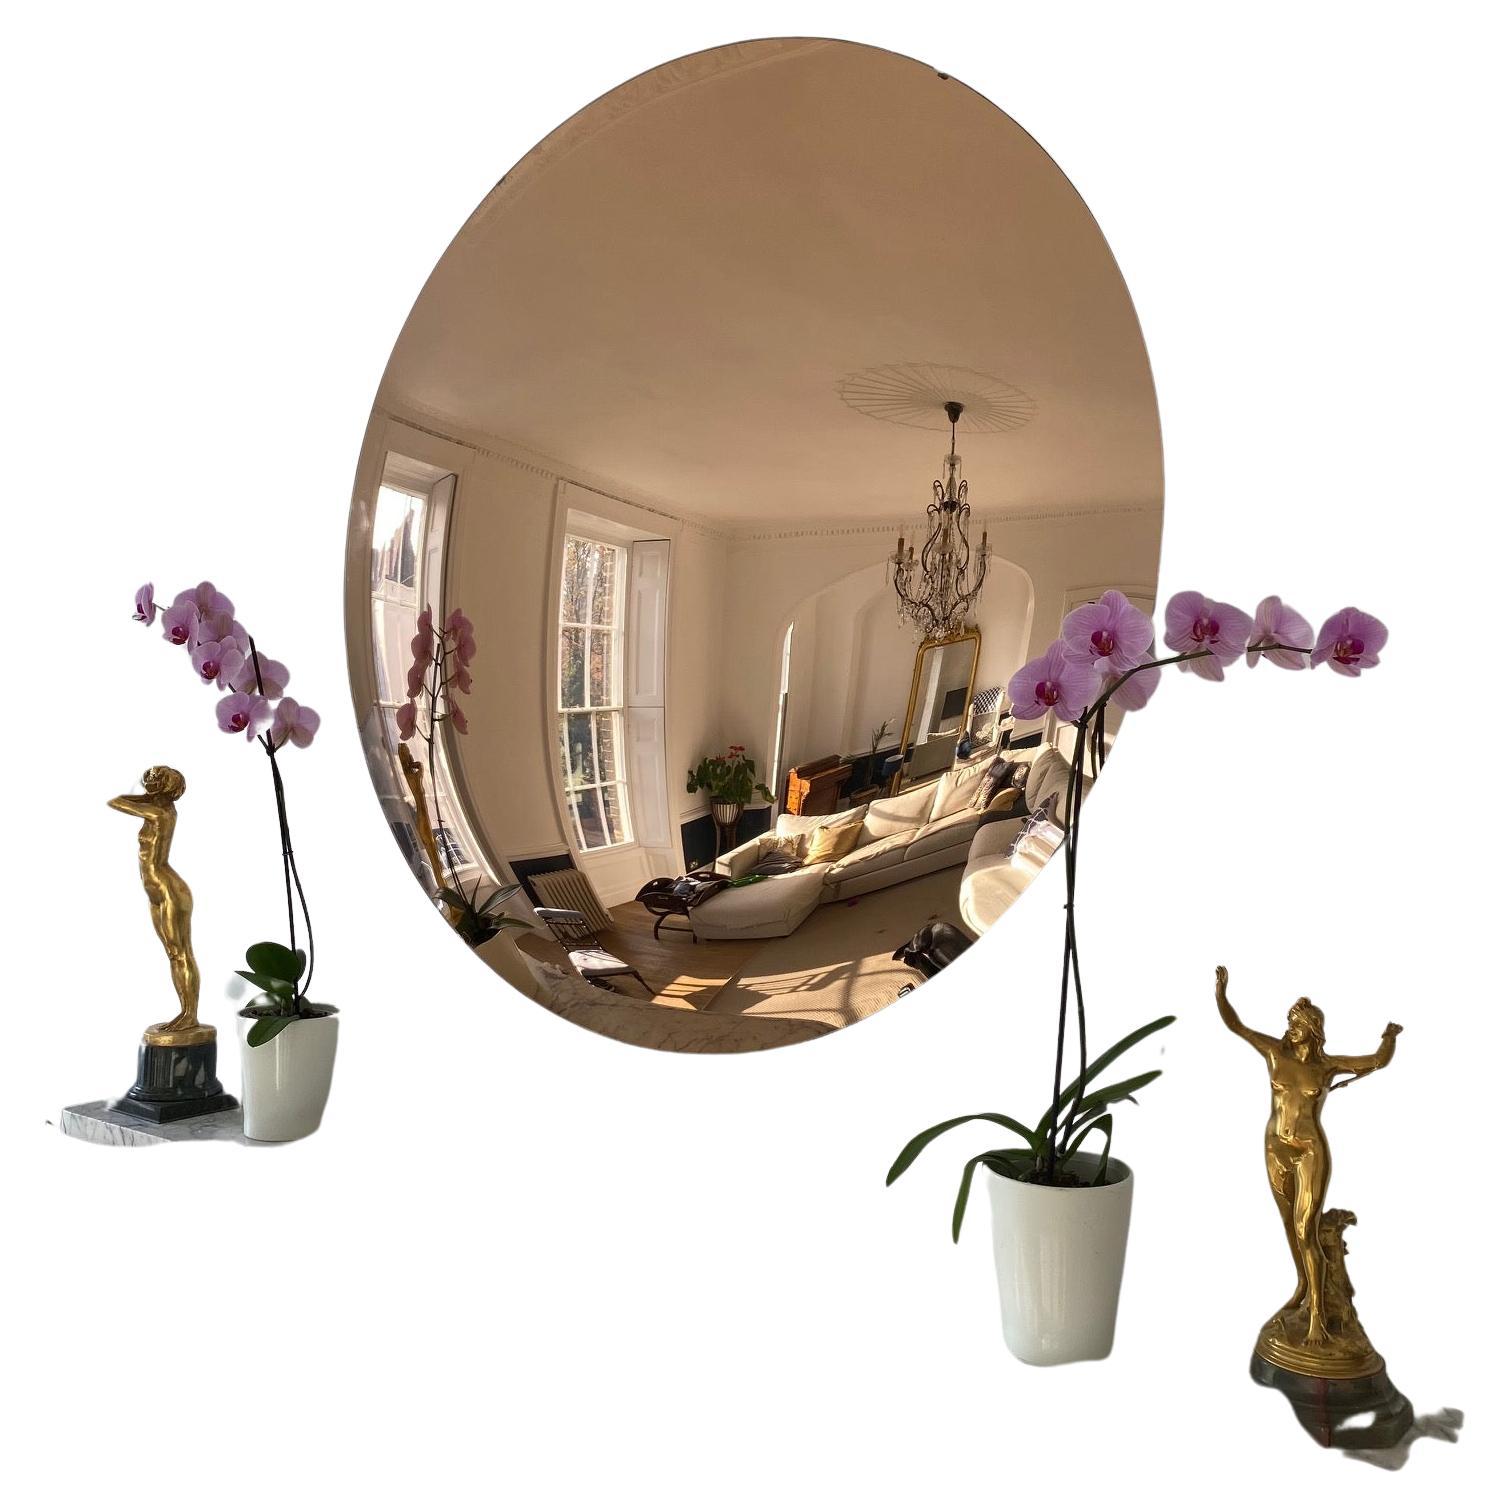 The Ravello 120 cm rose gold glass convex wall mirror is fabricated from 6mm low iron glass for extra clarity. 

The mirror is 120 cms in diameter and held in position with four matching wall fixings. The projection of the mirror is 8 cms.

We also